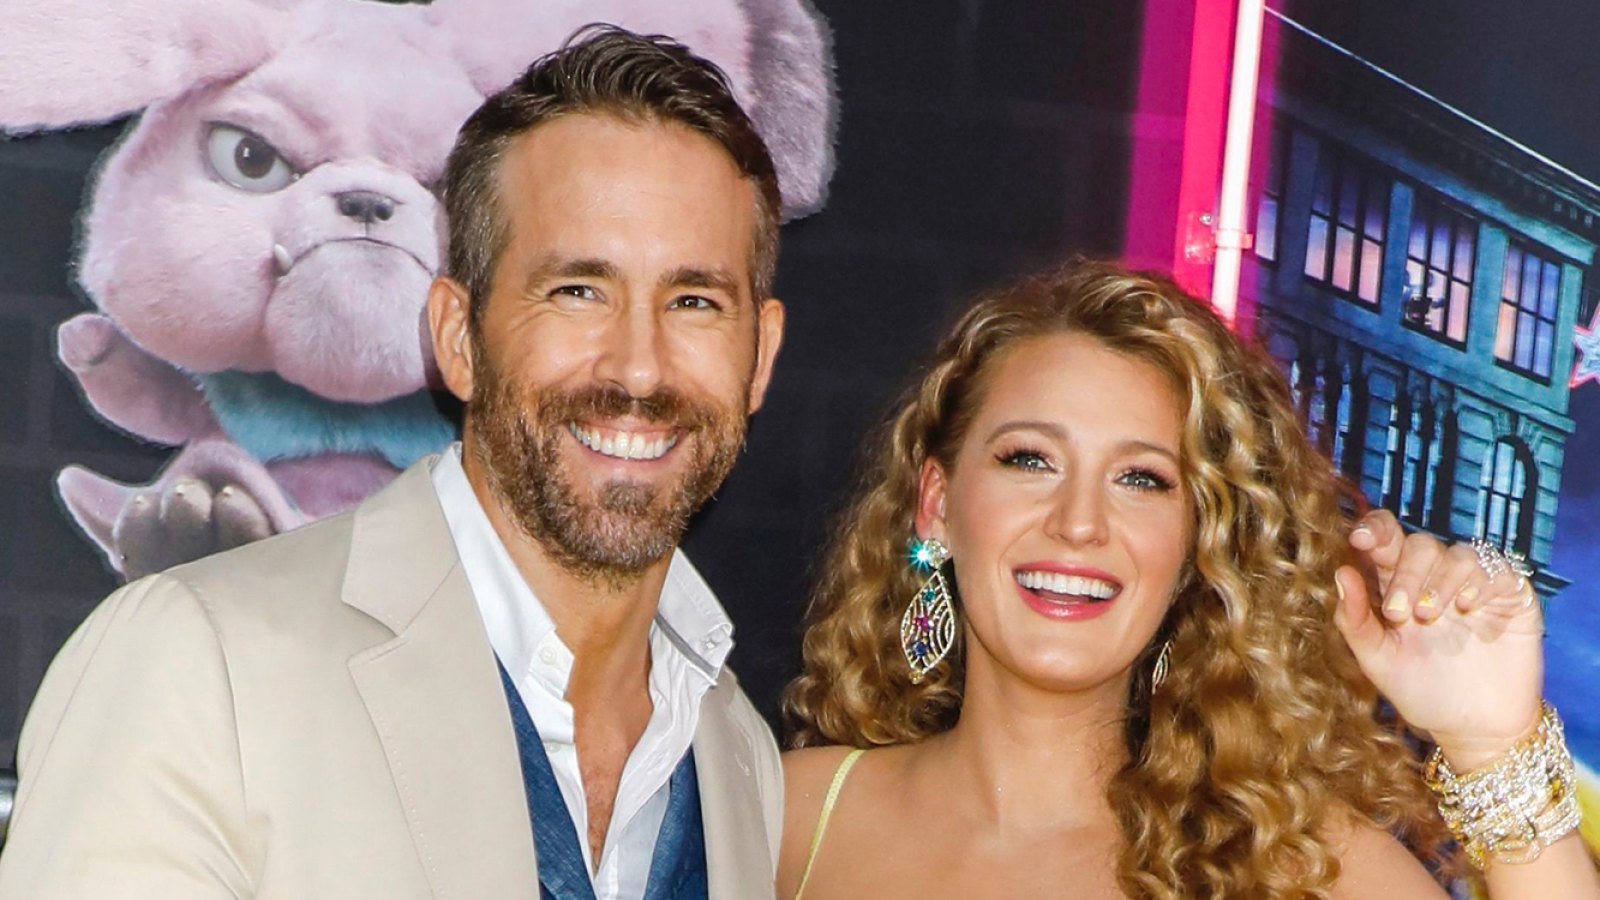 Blake Lively Shares 'High' Video Recorded by Ryan Reynolds